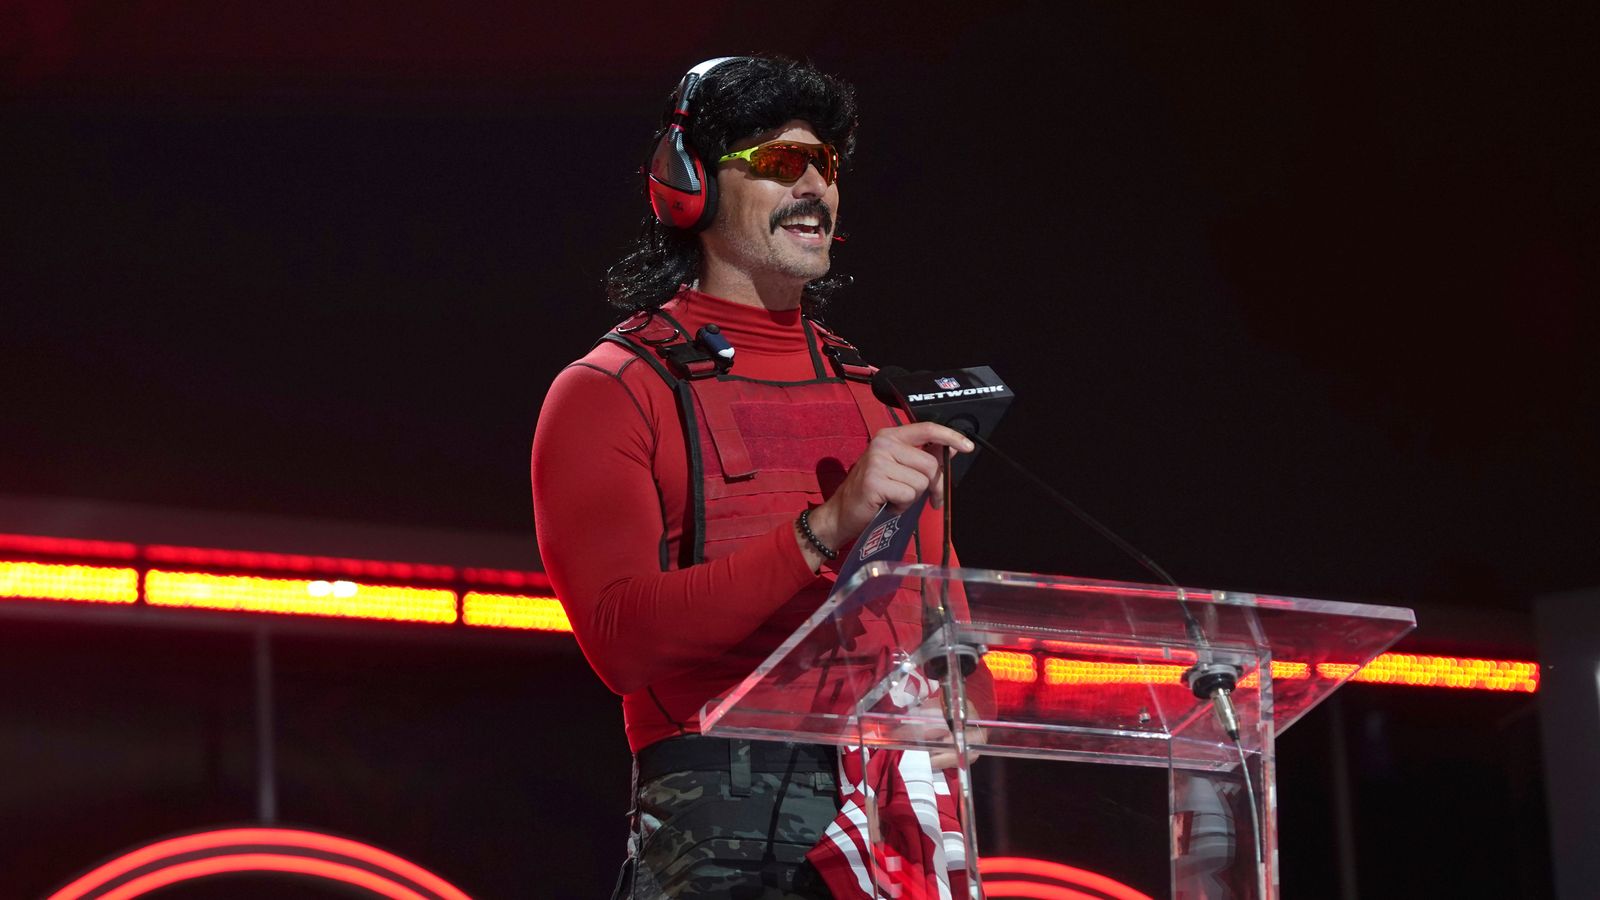 Huge former Twitch streamer Dr DisRespect admits to ‘inappropriate’ messages to minor in lengthy statement